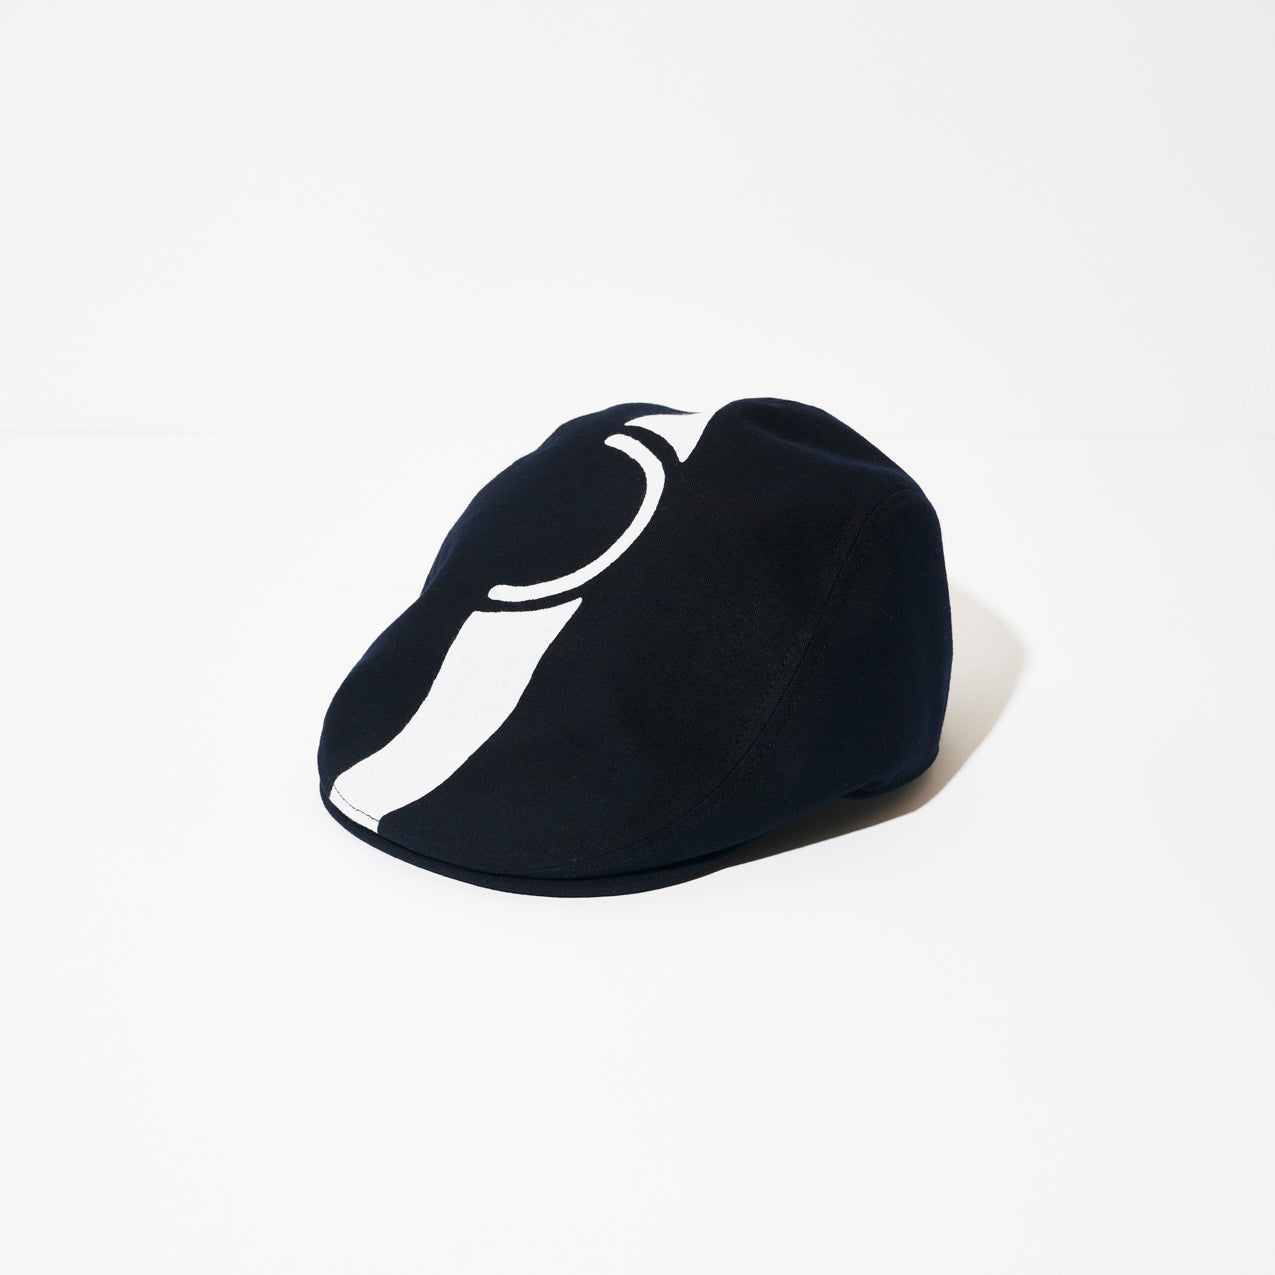 Hunting cap whale